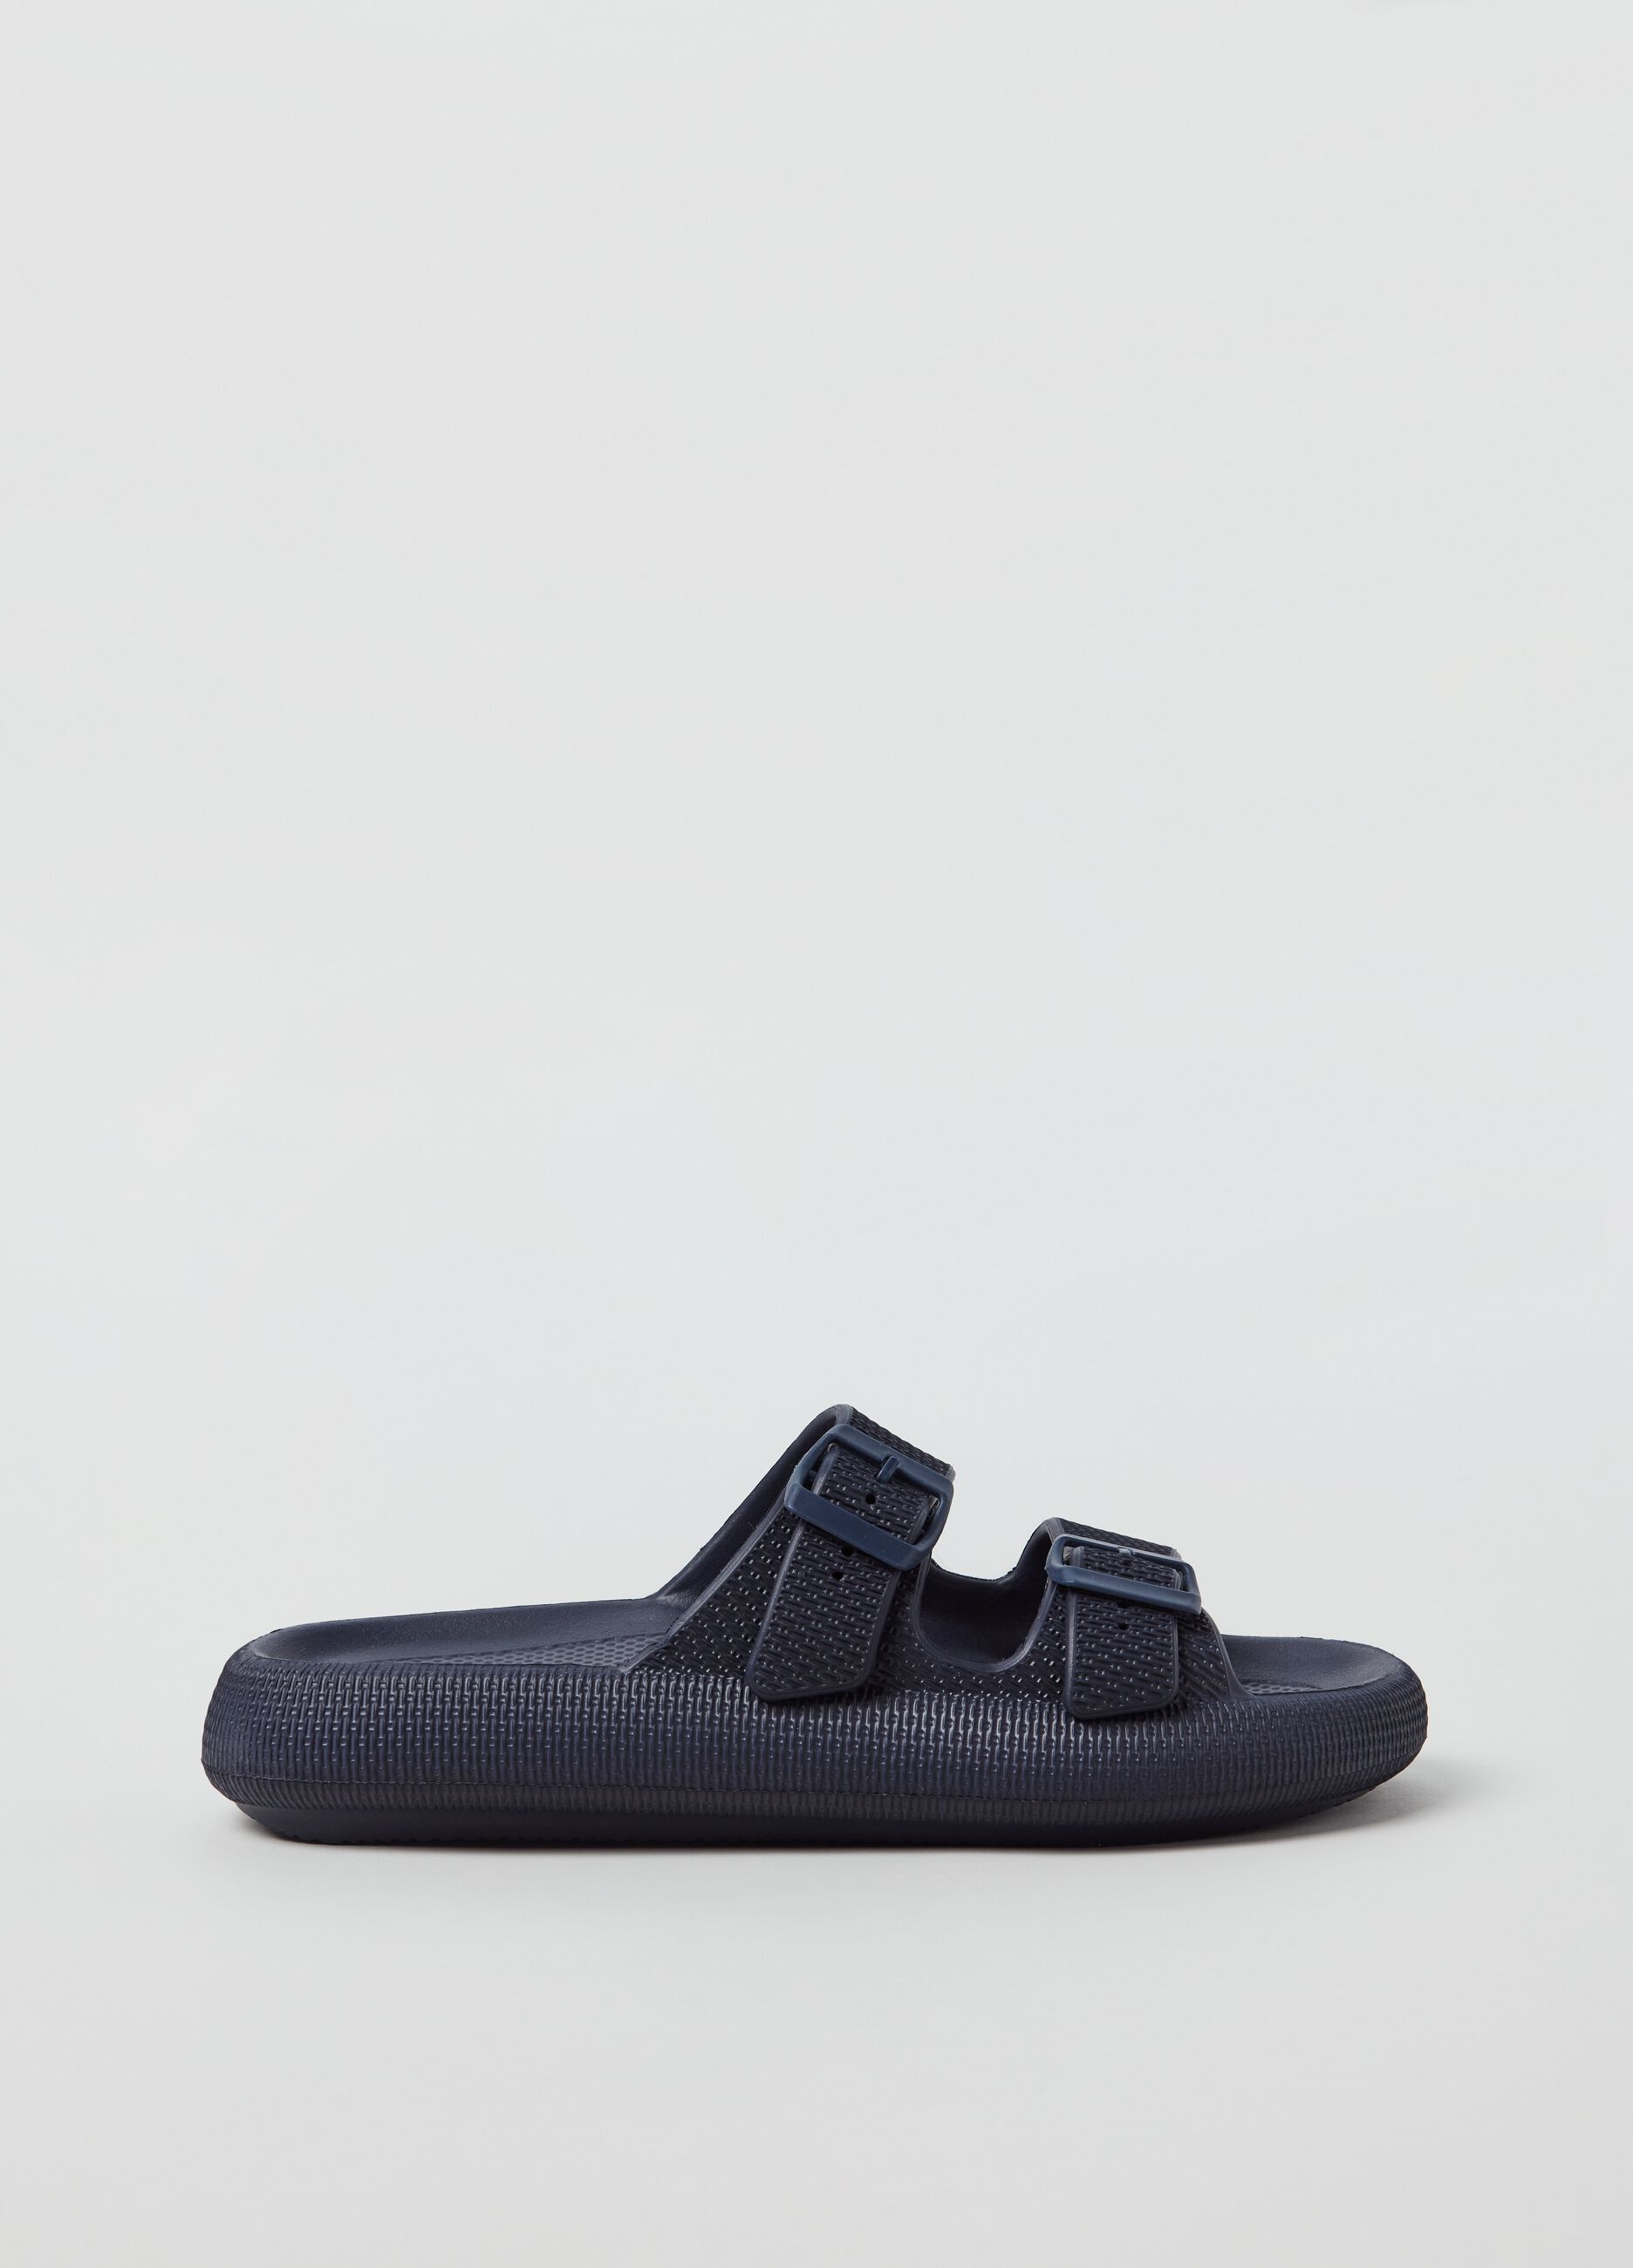 Maui and Sons double-band sandal